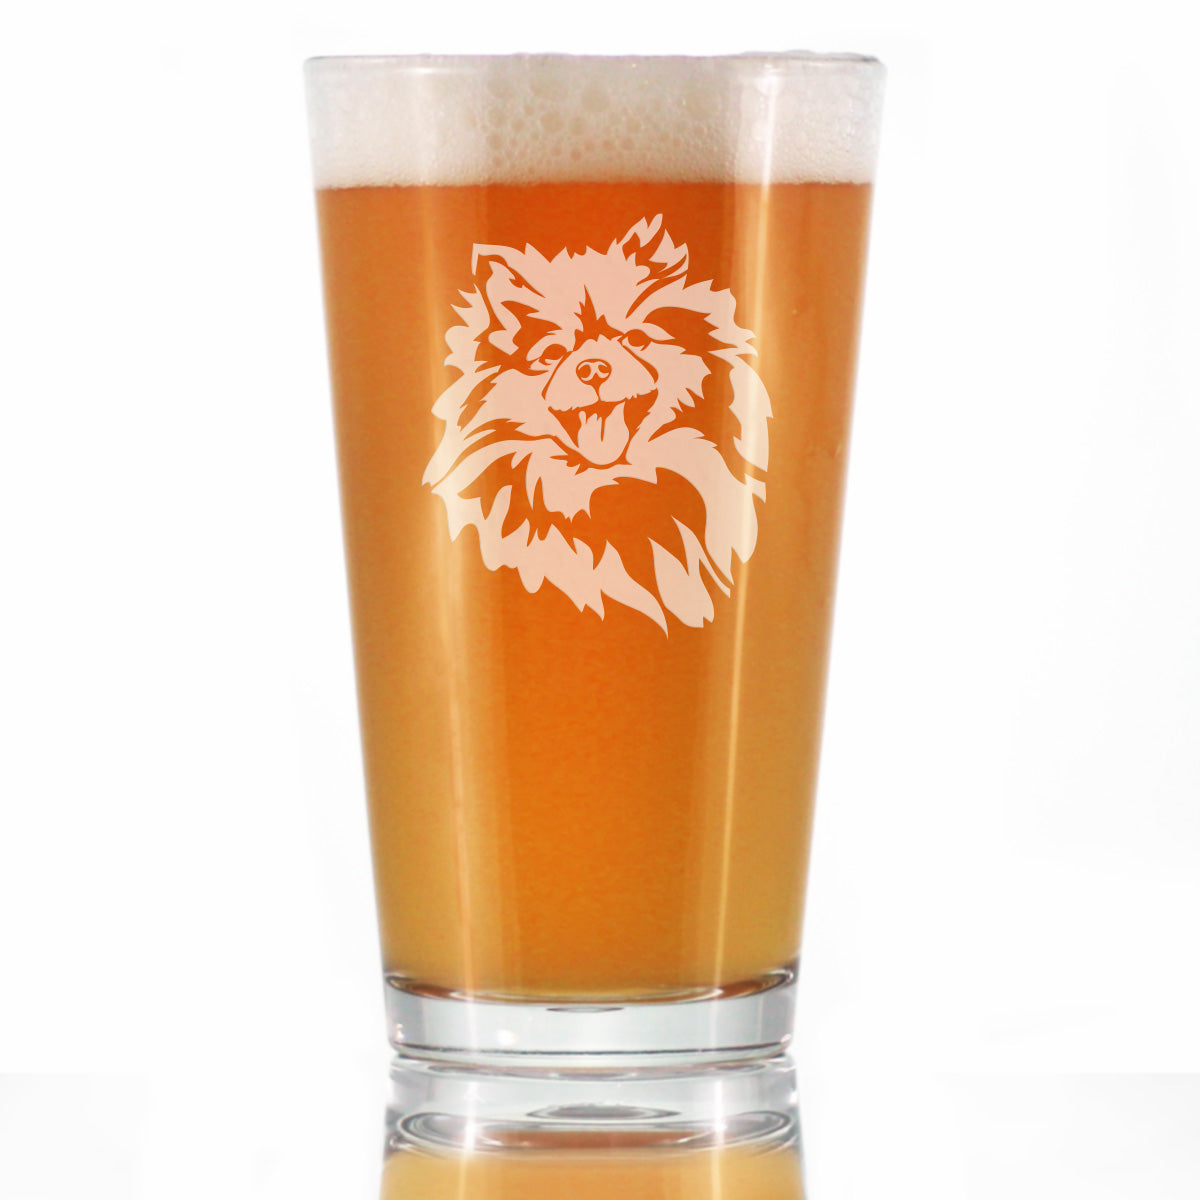 Pomeranian Face Pint Glass for Beer - Unique Dog Themed Decor and Gifts for Moms &amp; Dads of Pomeranians - 16 Oz